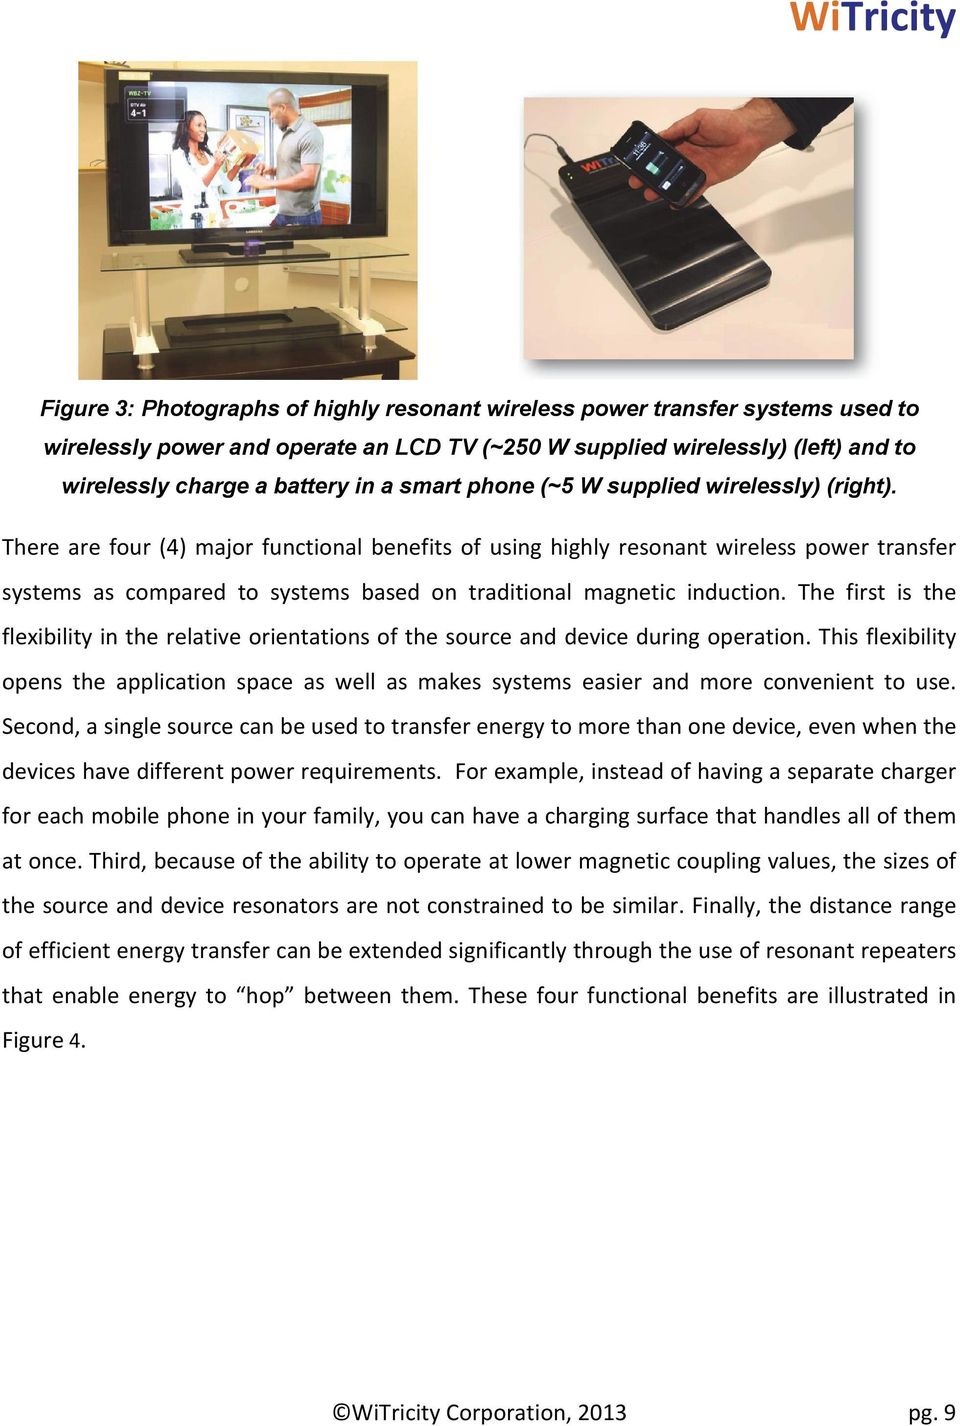 There are four (4) major functional benefits of using highly resonant wireless power transfer systems as compared to systems based on traditional magnetic induction.